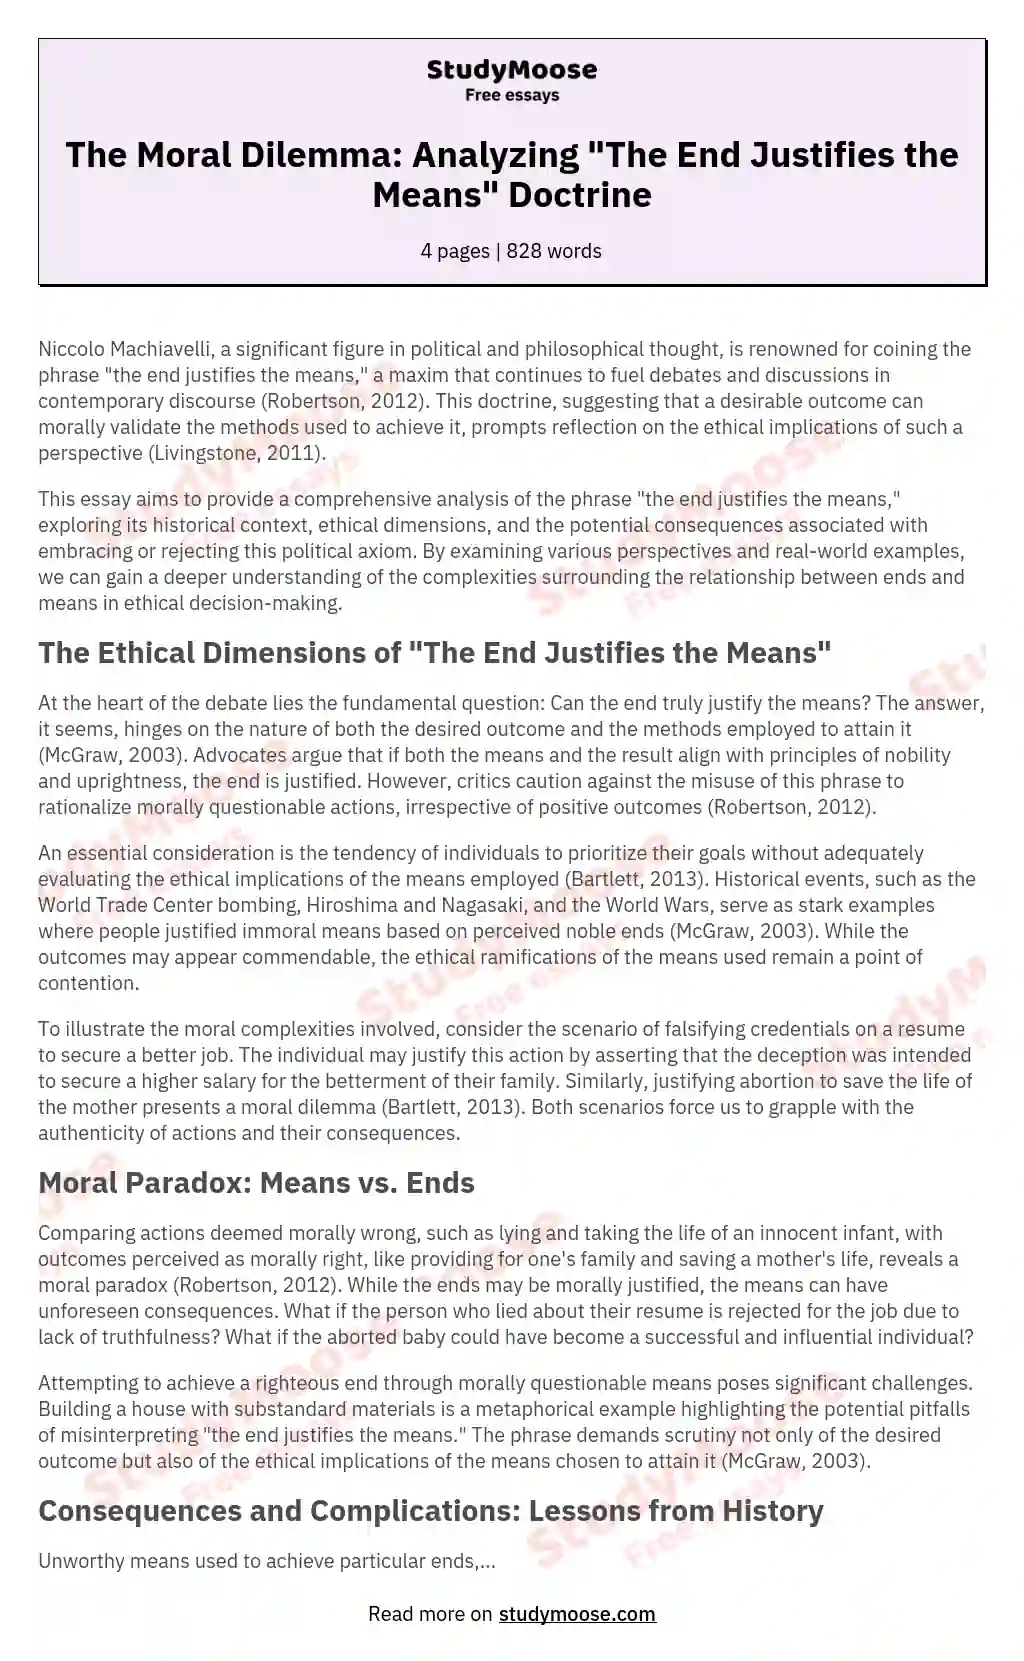 The Moral Dilemma: Analyzing "The End Justifies the Means" Doctrine essay